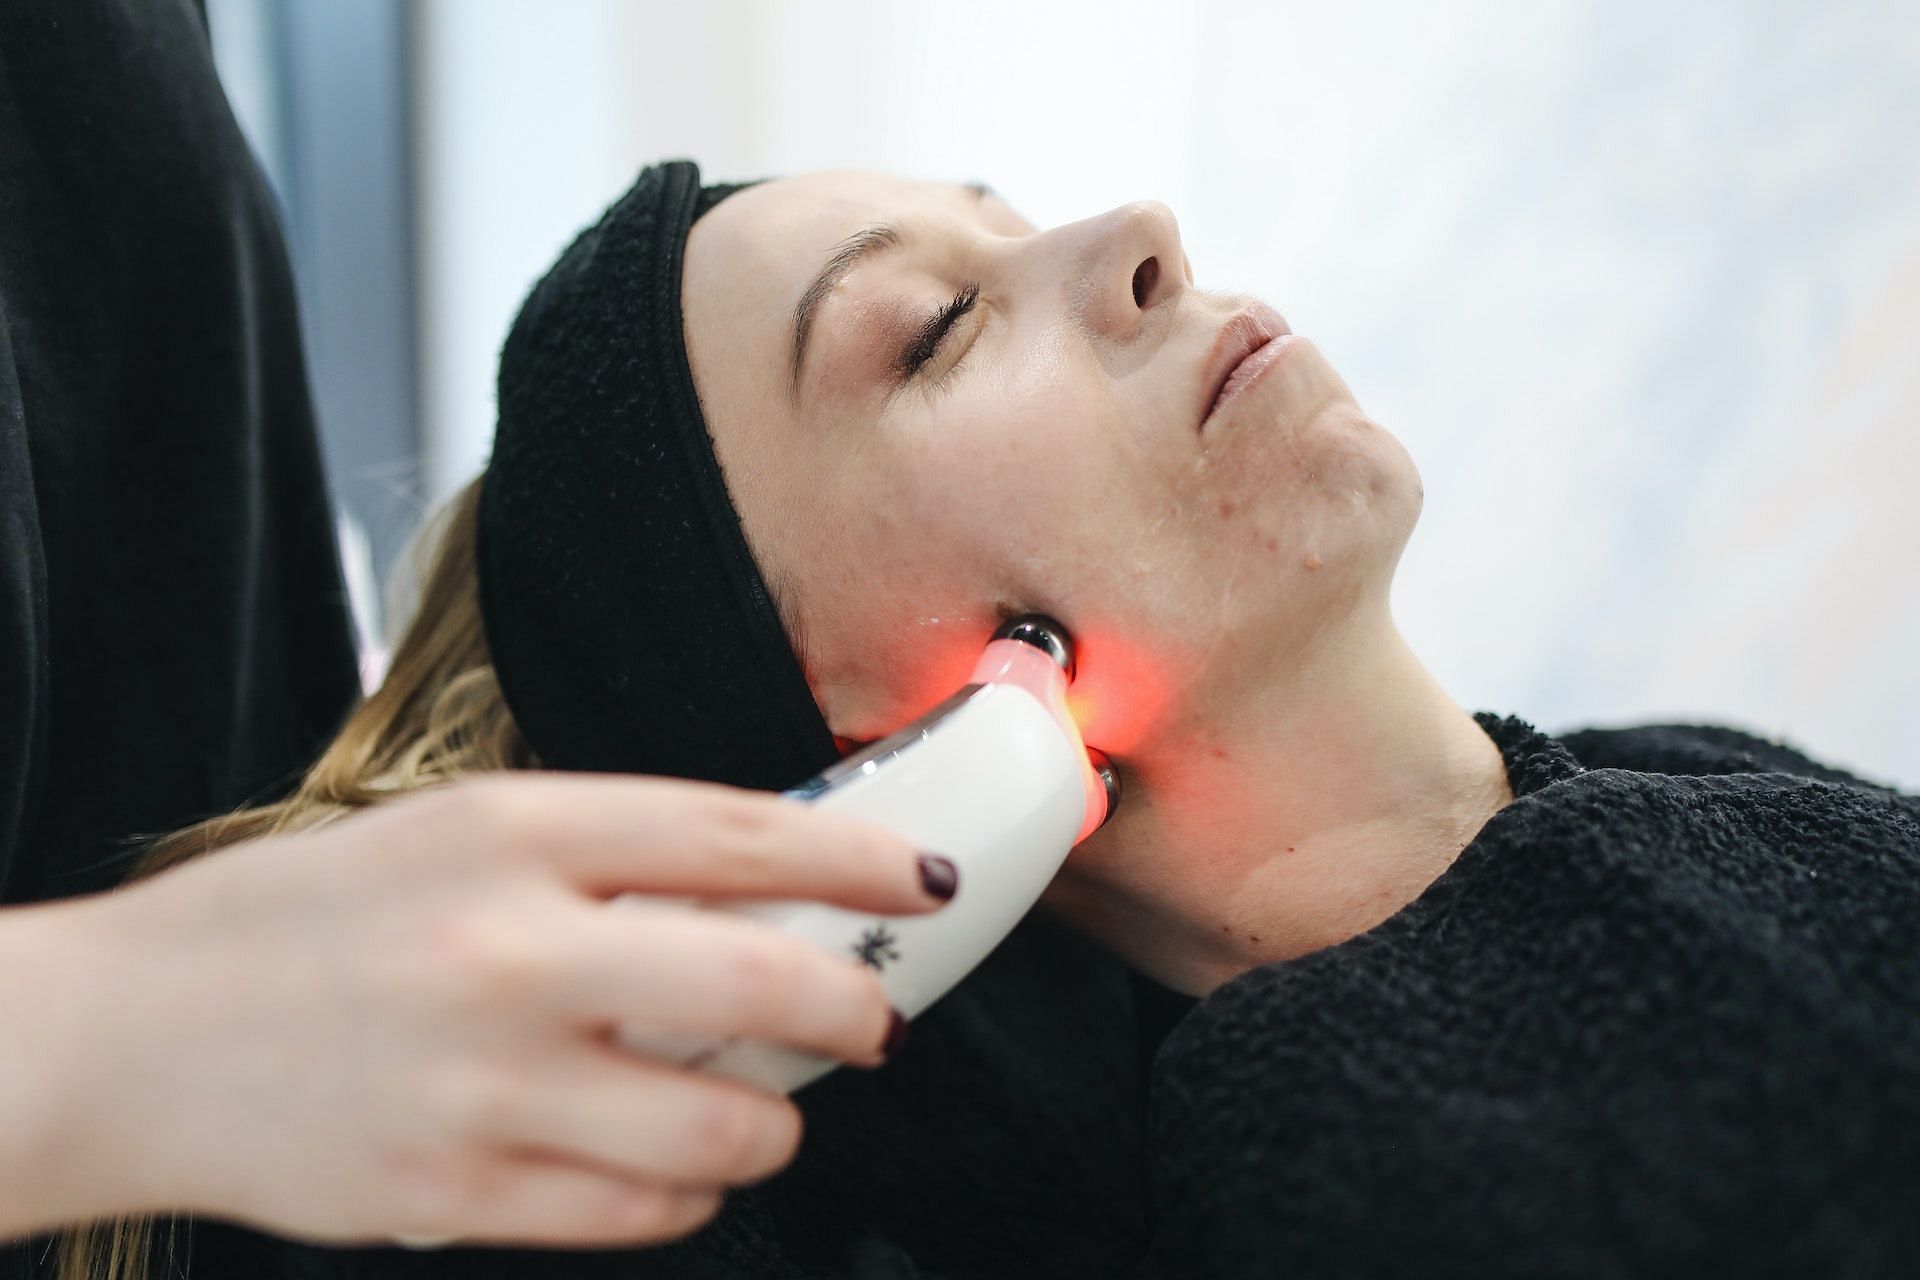 Laser treatment is a great option to eliminate fine lines and wrinkles. (Photo via Pexels/Polina Tankilevitch)